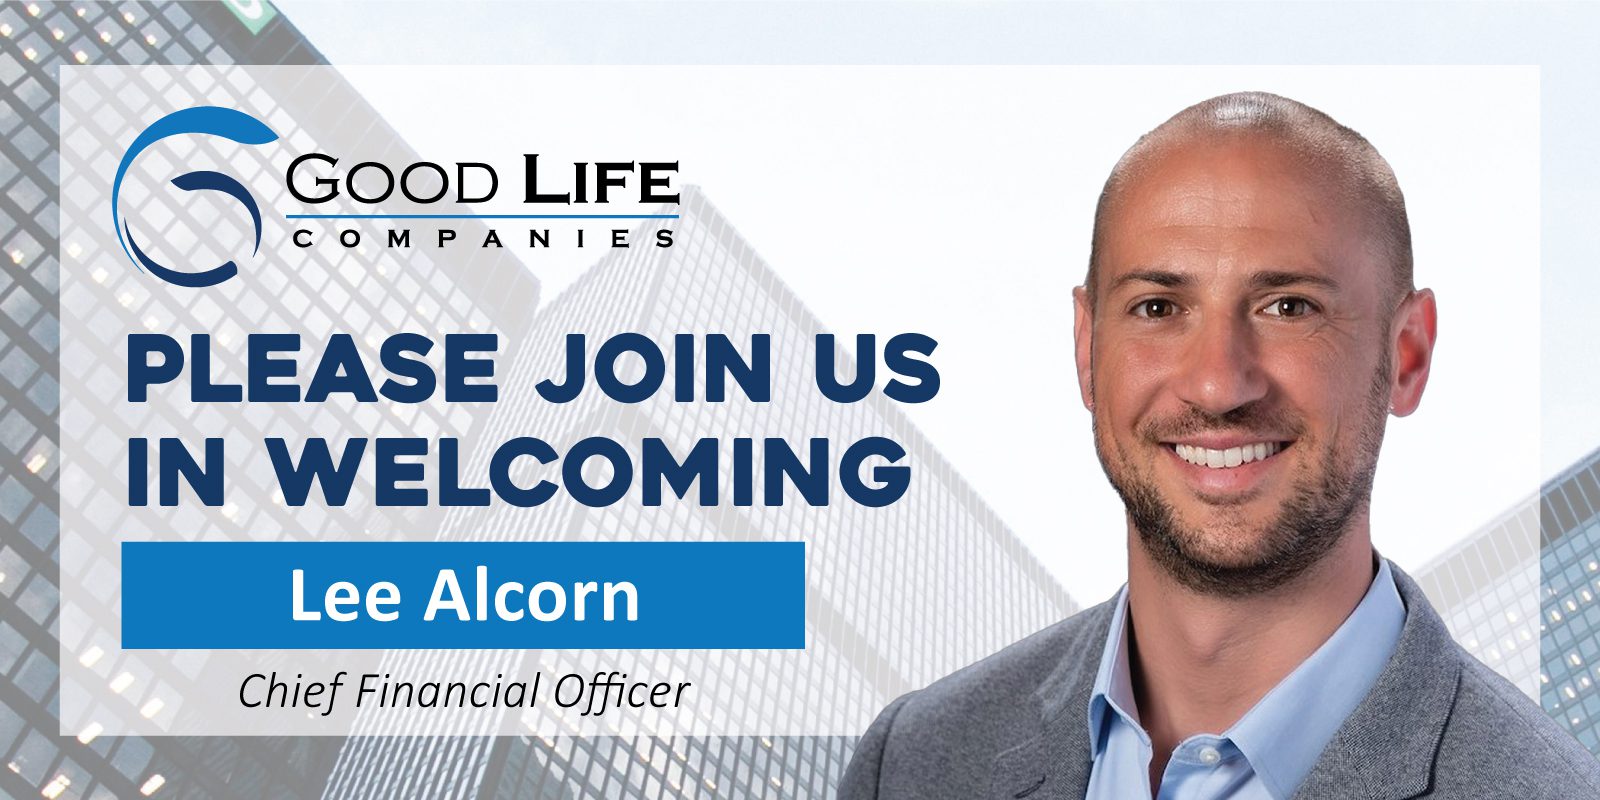 Good Life Companies Welcomes Lee Alcorn As Chief Financial Officer